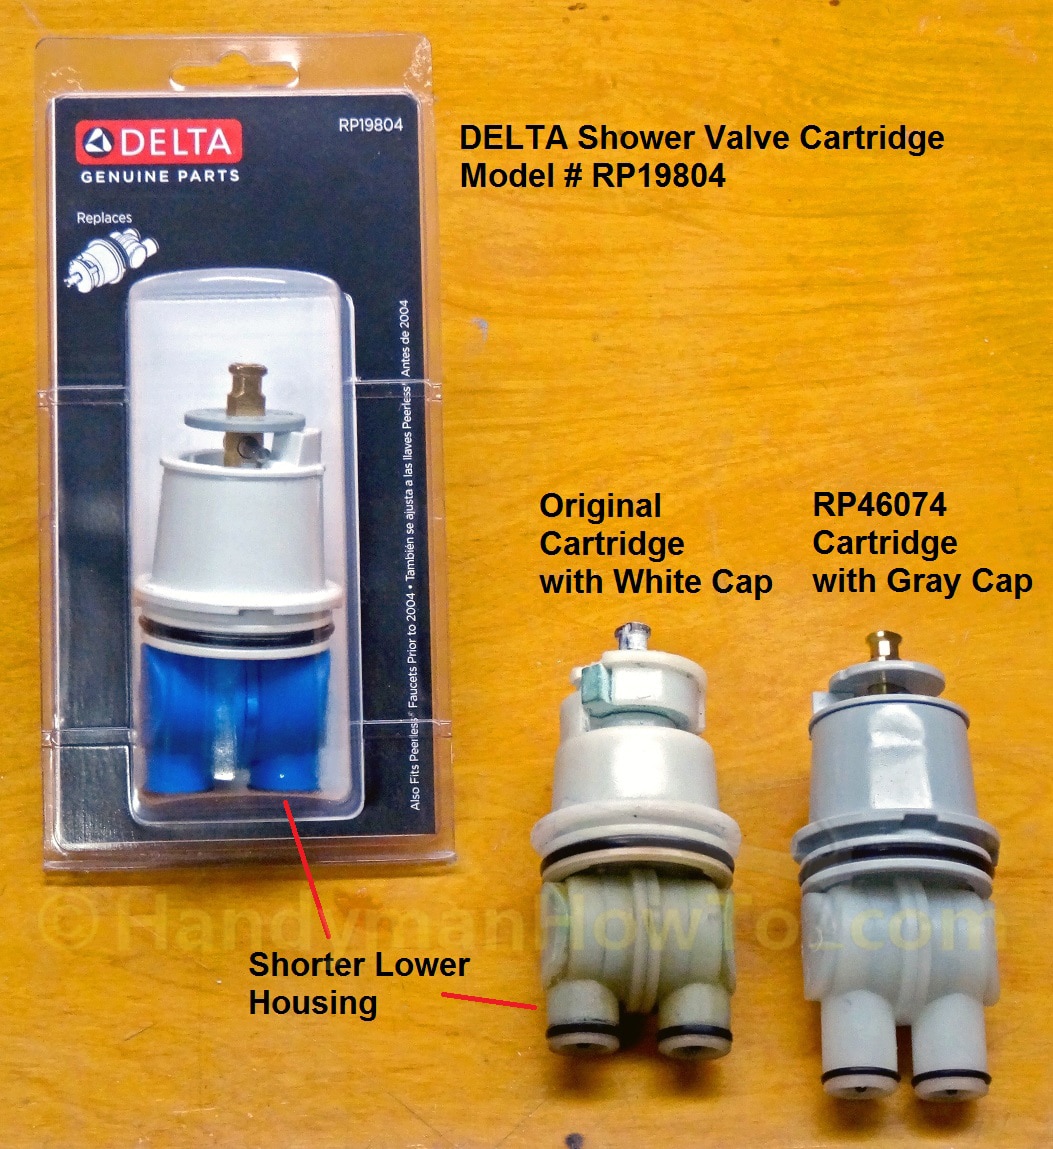 How do you download a Delta shower faucet manual?